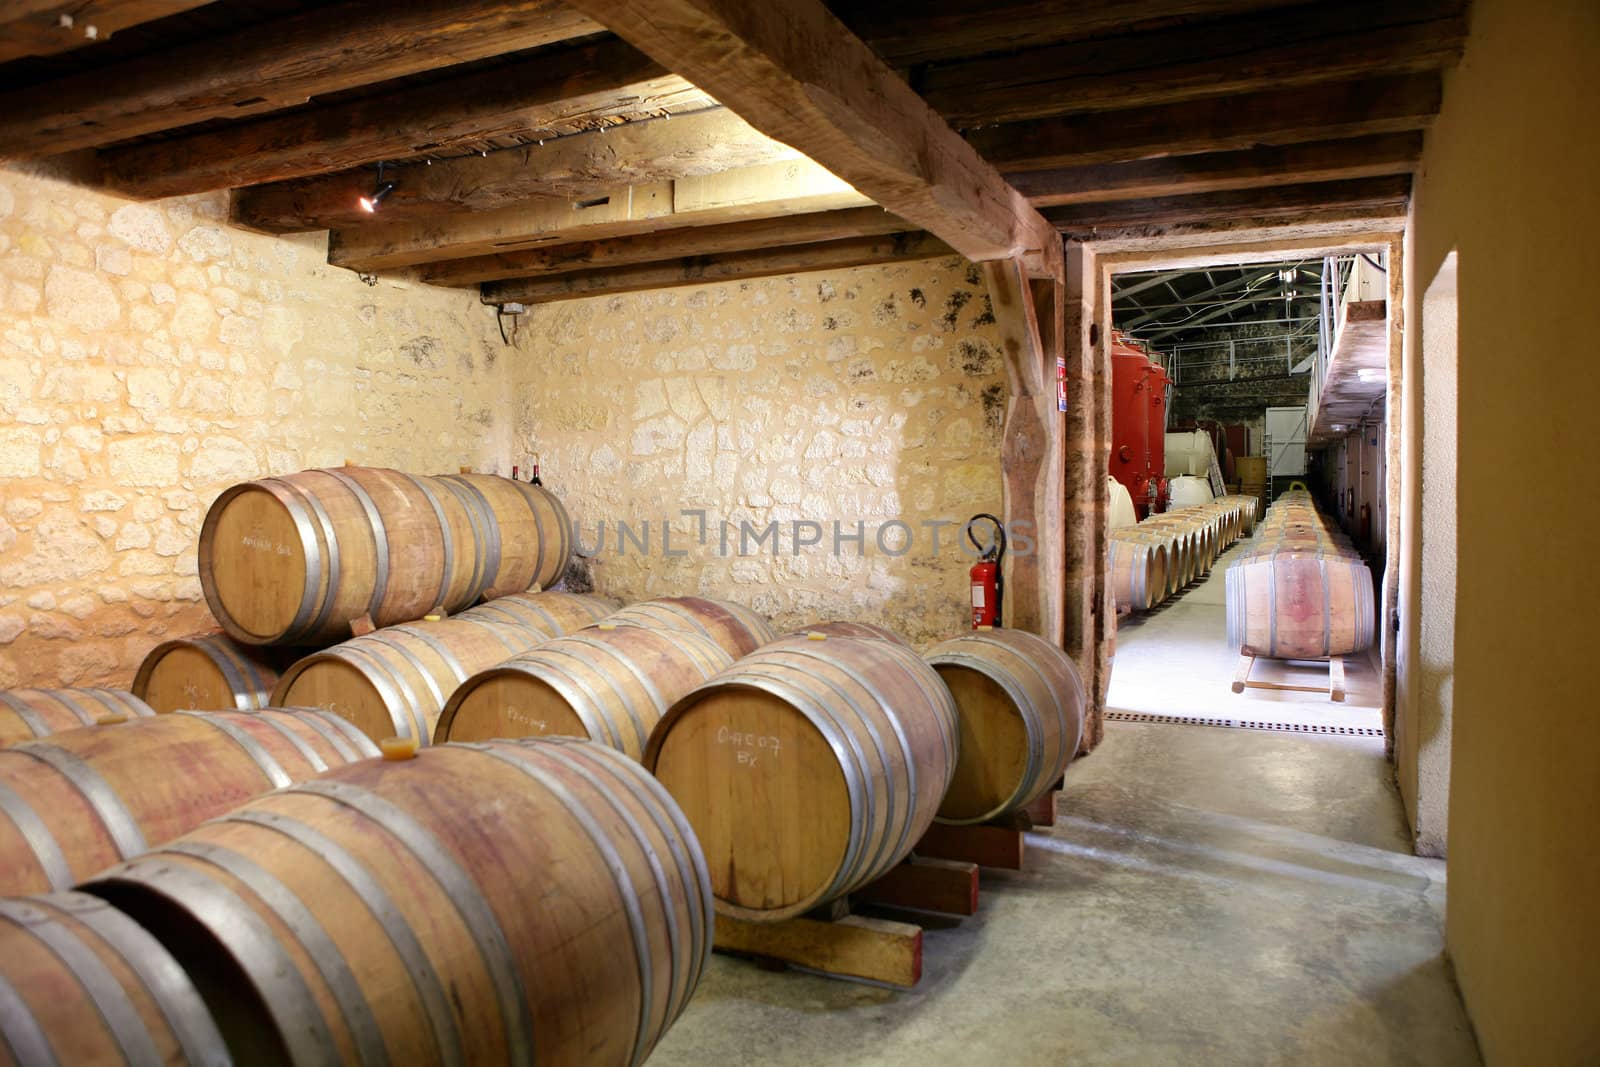 Rows of barrels in a cellar by phovoir